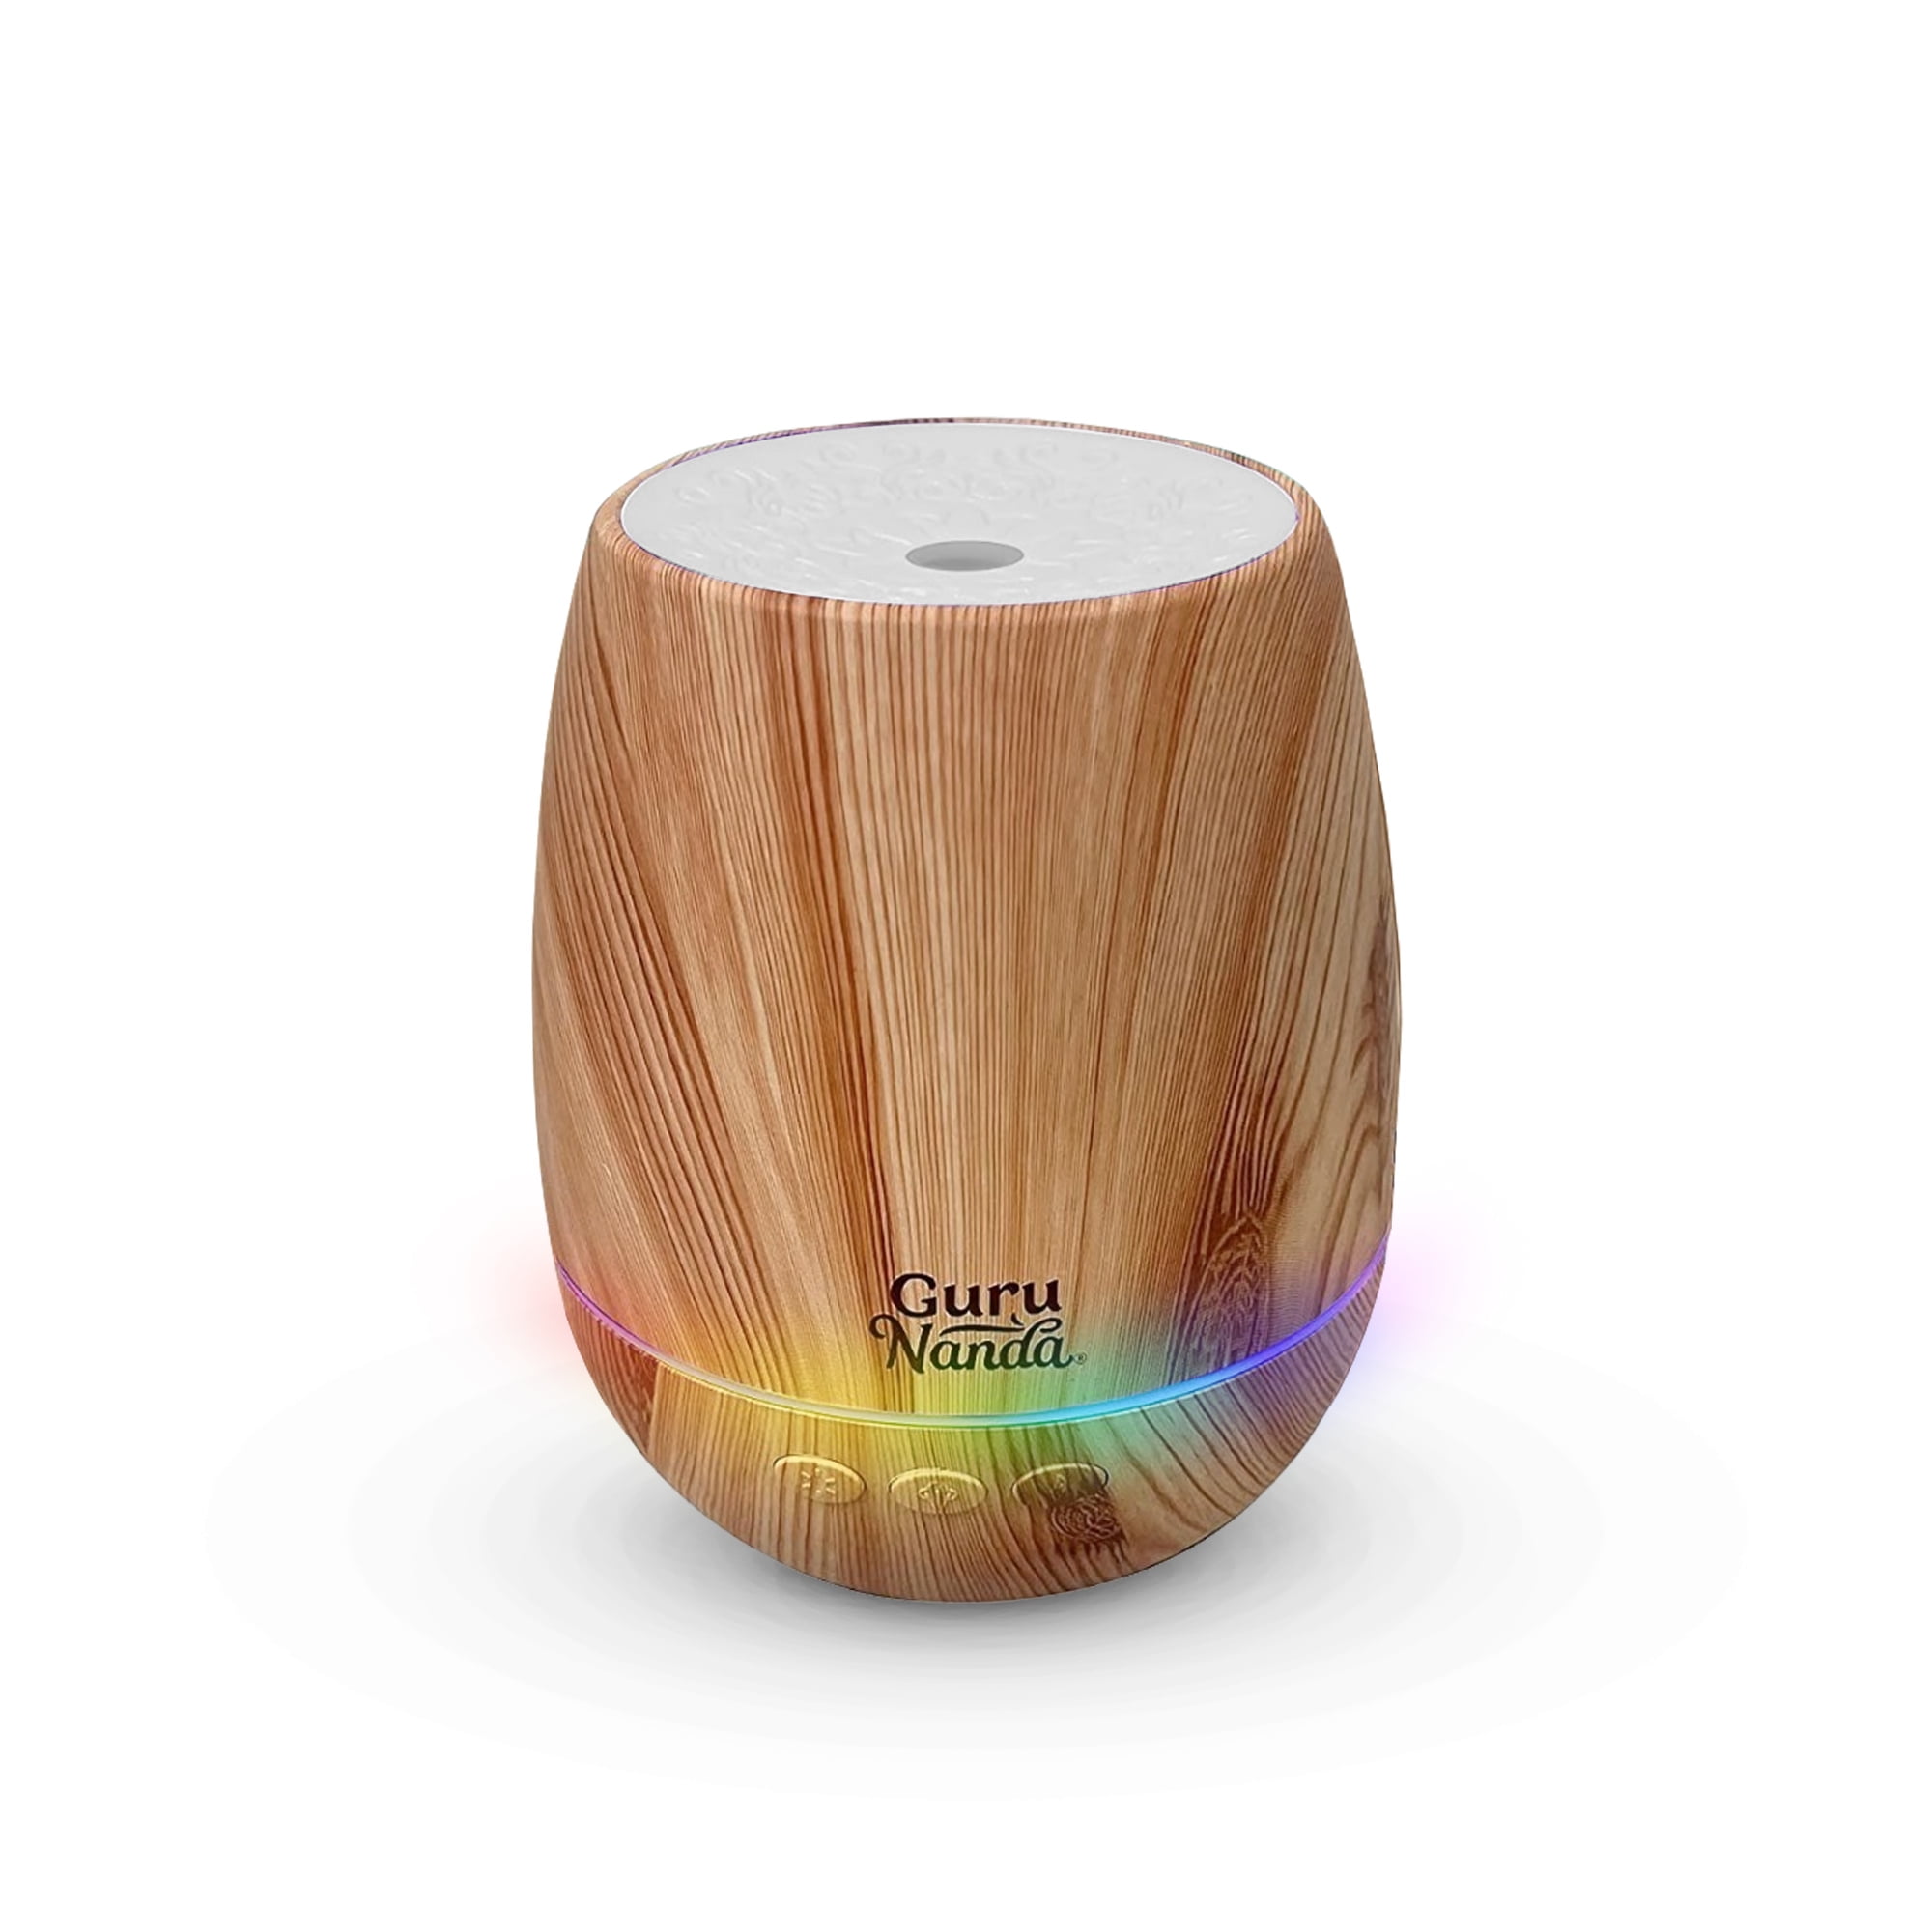 Gurunanda Woodsy Ultrasonic Diffuser & Cool Mist Humidifier - Aromatherapy Diffuser with Auto Shut-Off, 7 LED Lights & 5 Modes - Perfect for Spa, Yoga